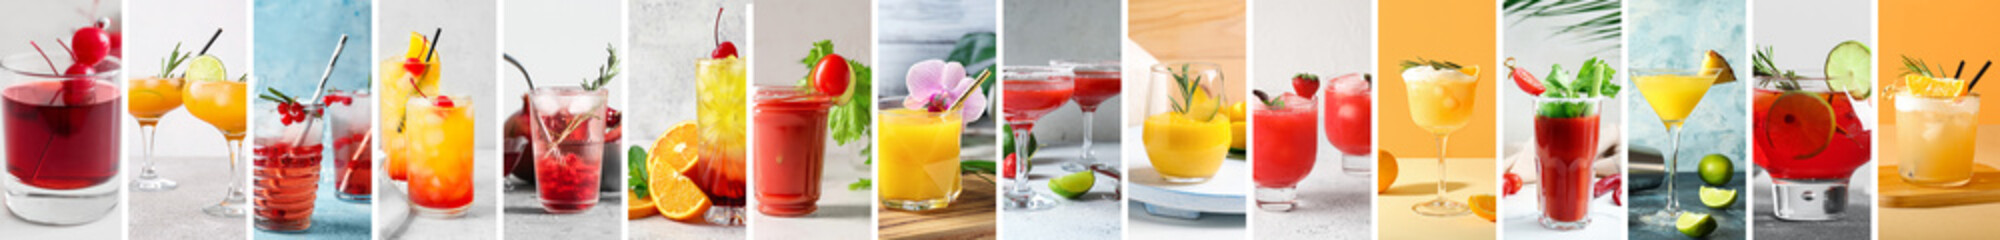 Collage with different delicious summer cocktails